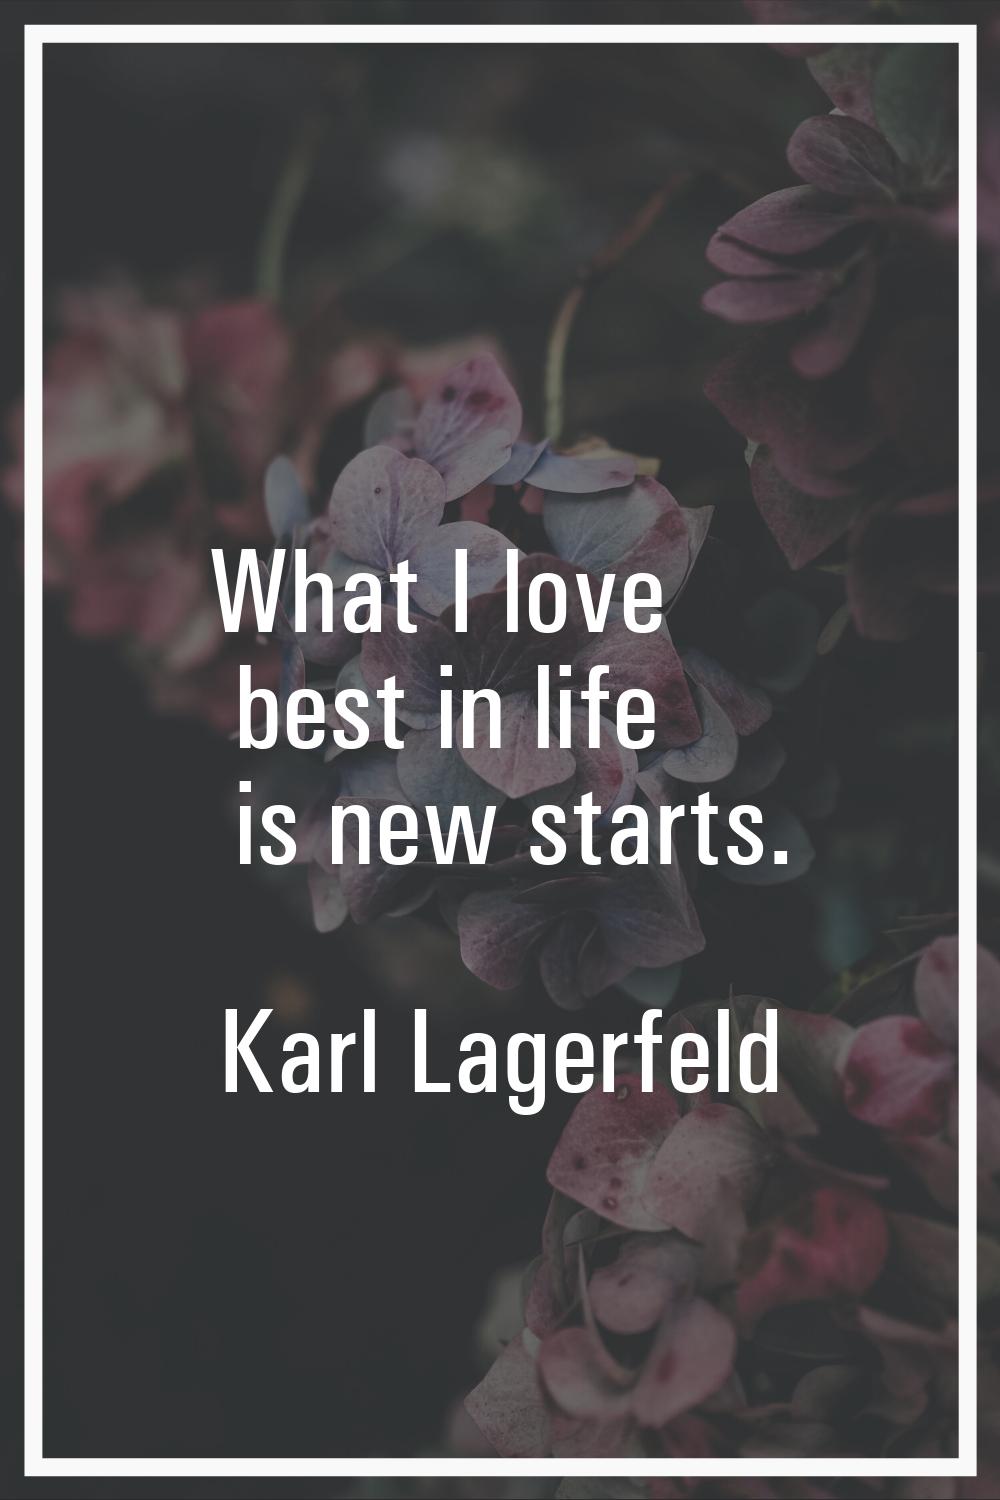 What I love best in life is new starts.